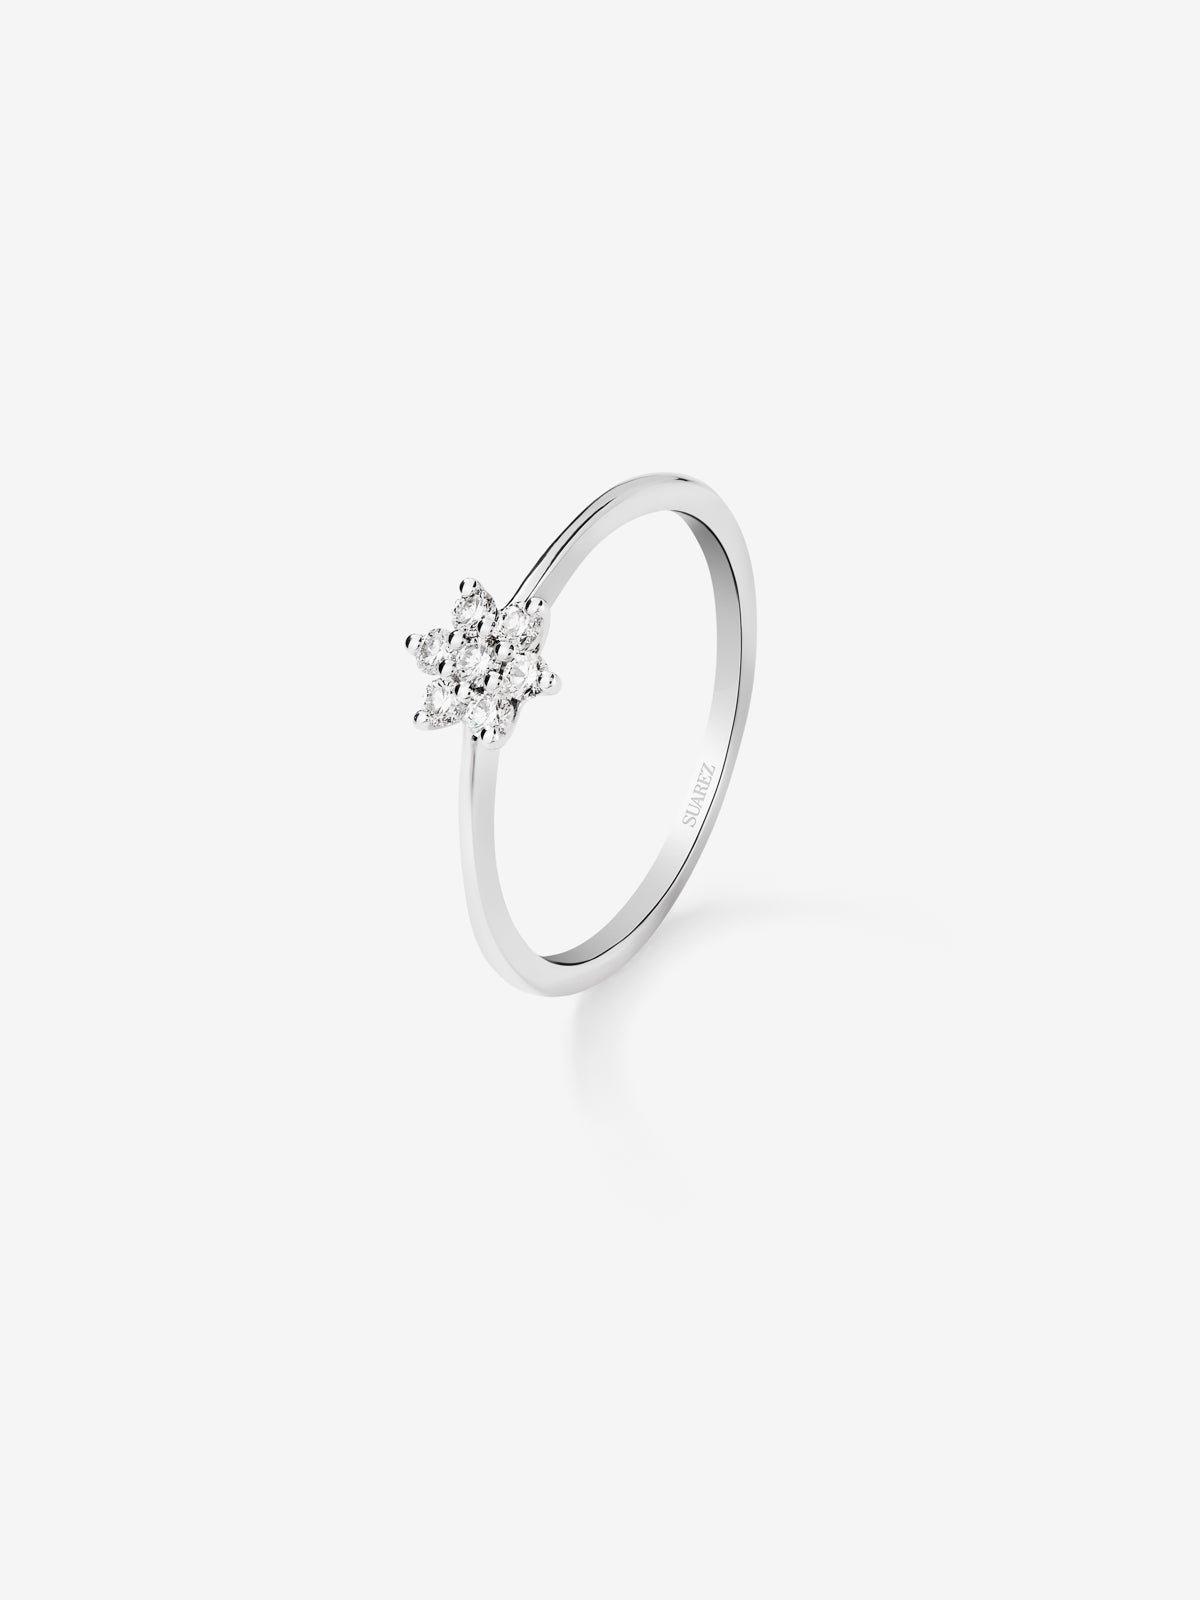 18K white gold ring with 7 brilliant-cut diamonds with a total of 0.14 cts and star shape